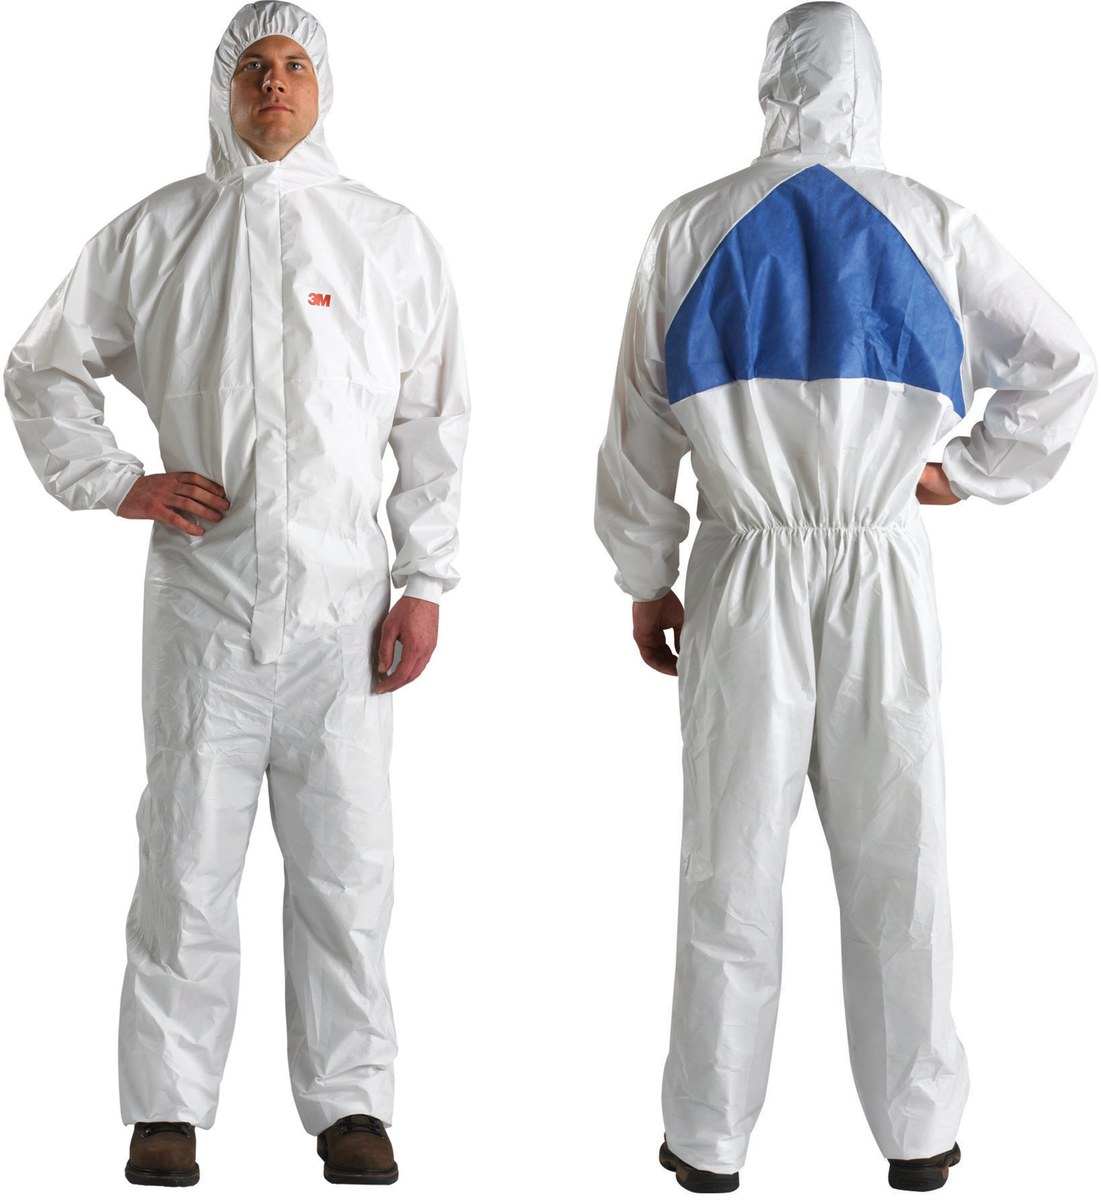 3M Disposable General Purpose & Work Coveralls 49807 - Size Large - White